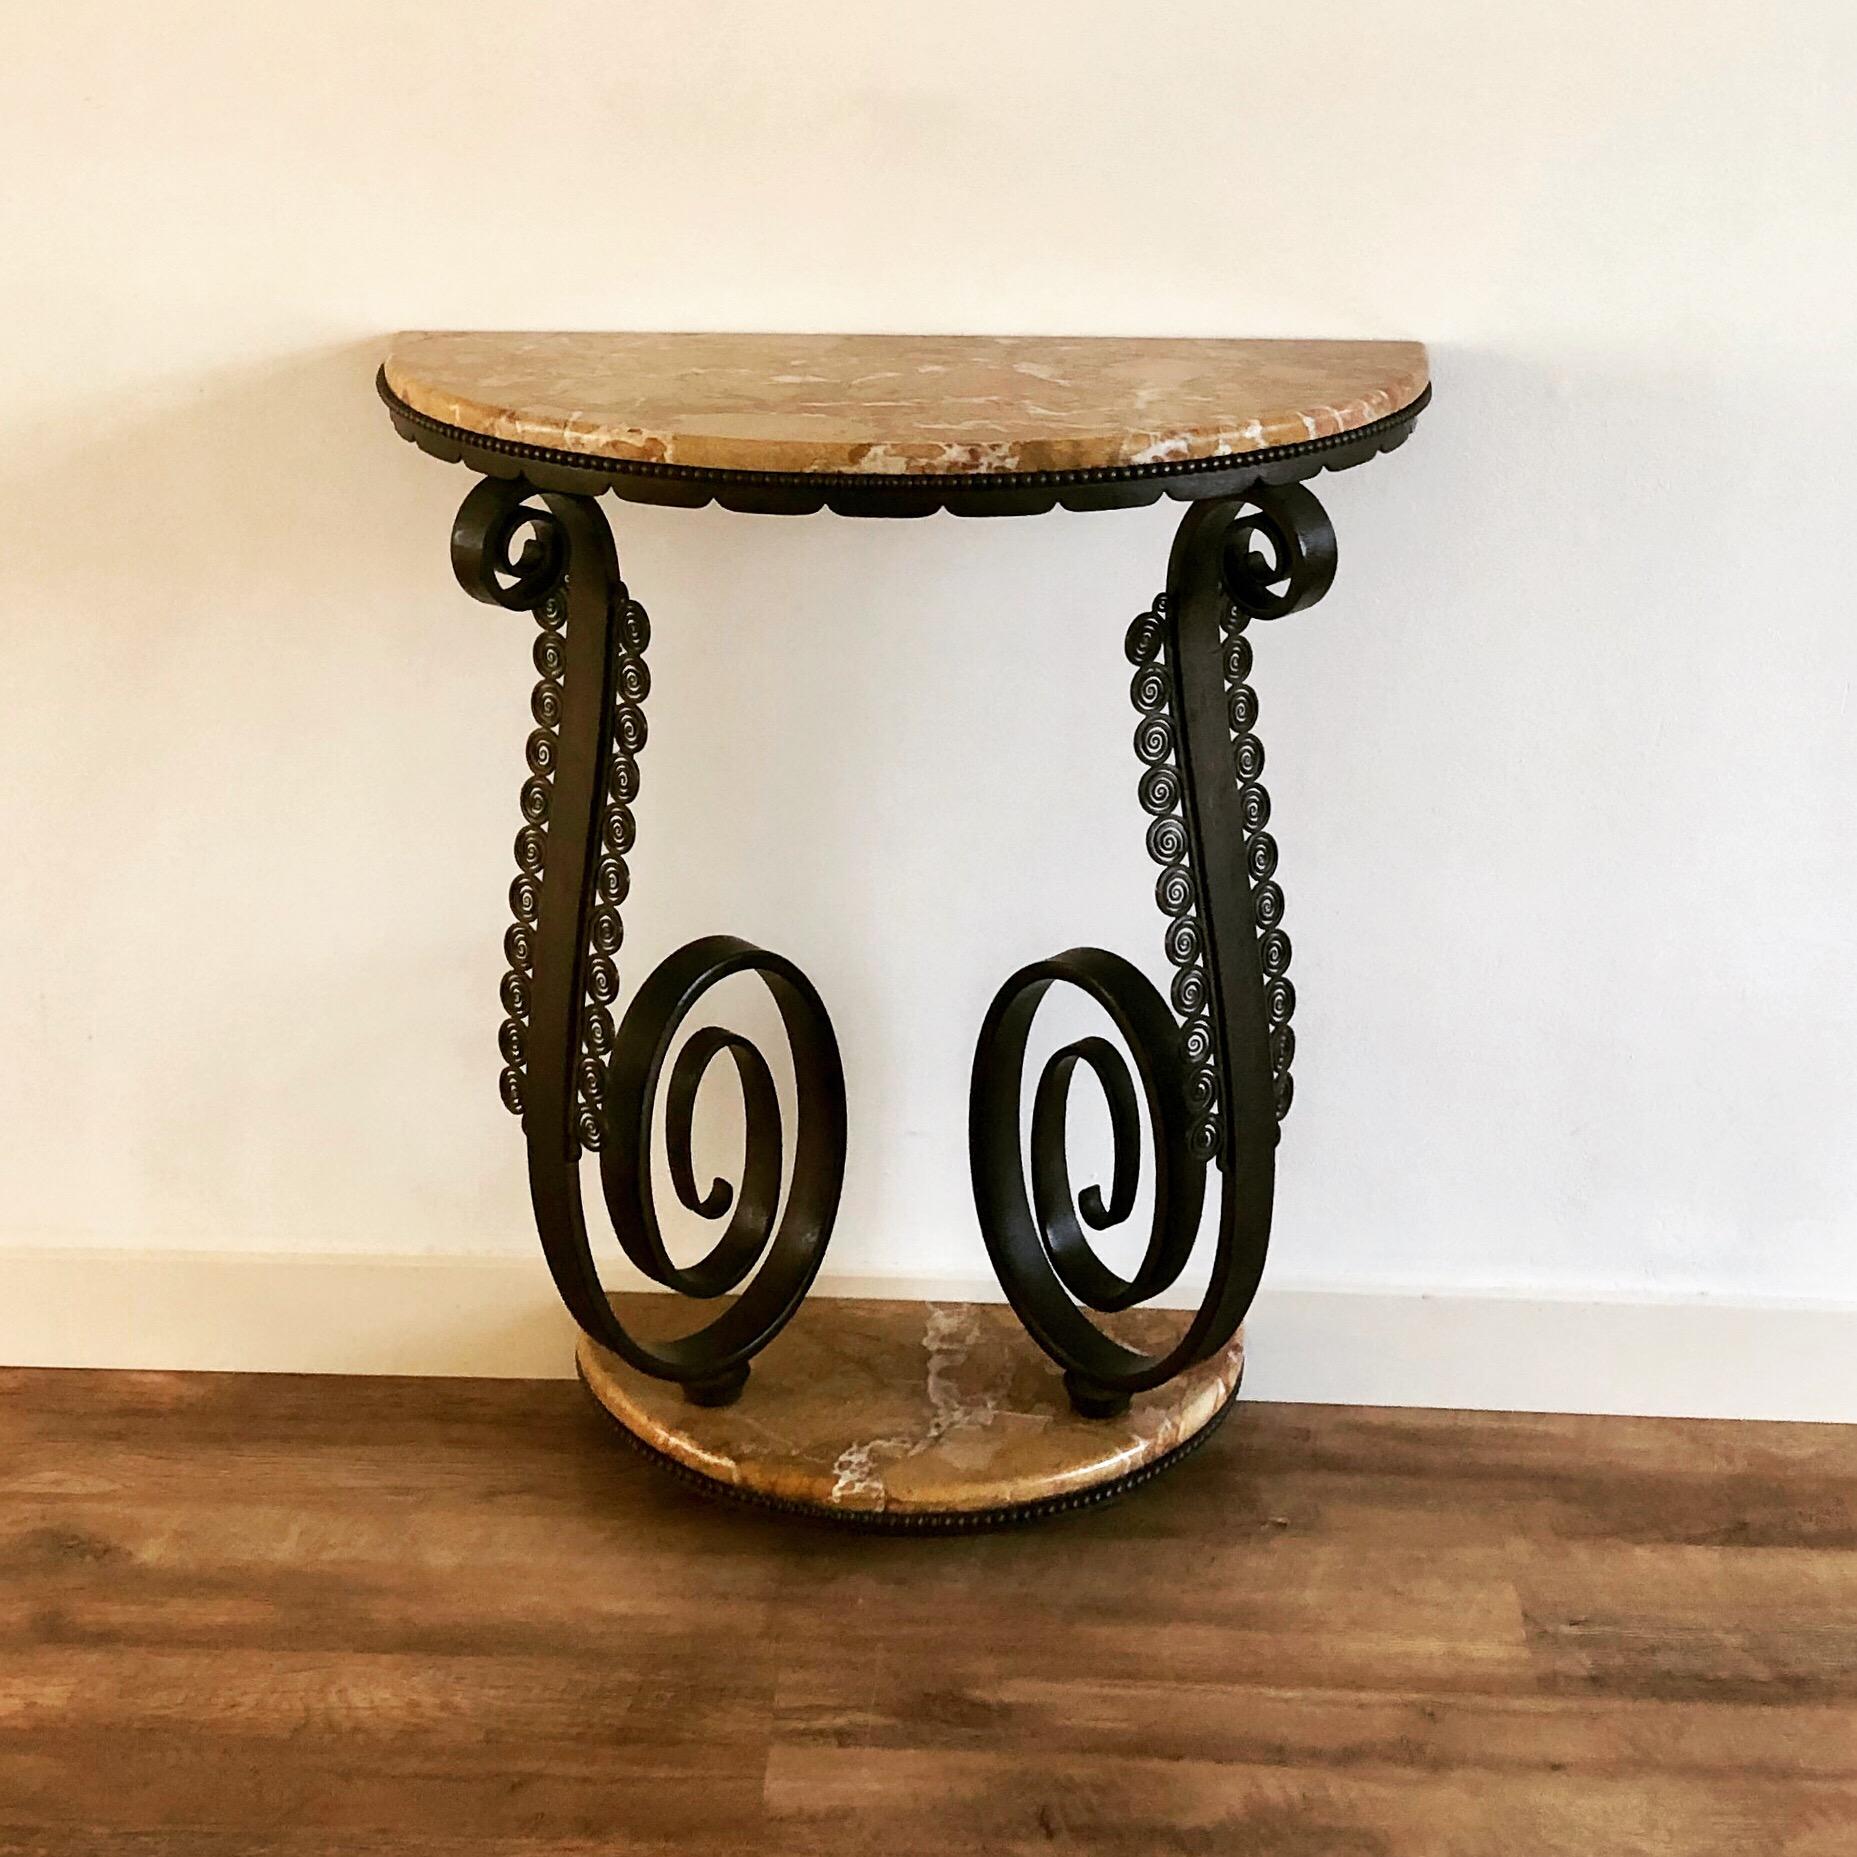 Important piece: completely original Edgar Brandt console table in wrought iron and marble.
Stamped in the iron E. Brandt.
It shows age related patina but overall it is still in excellent condition.